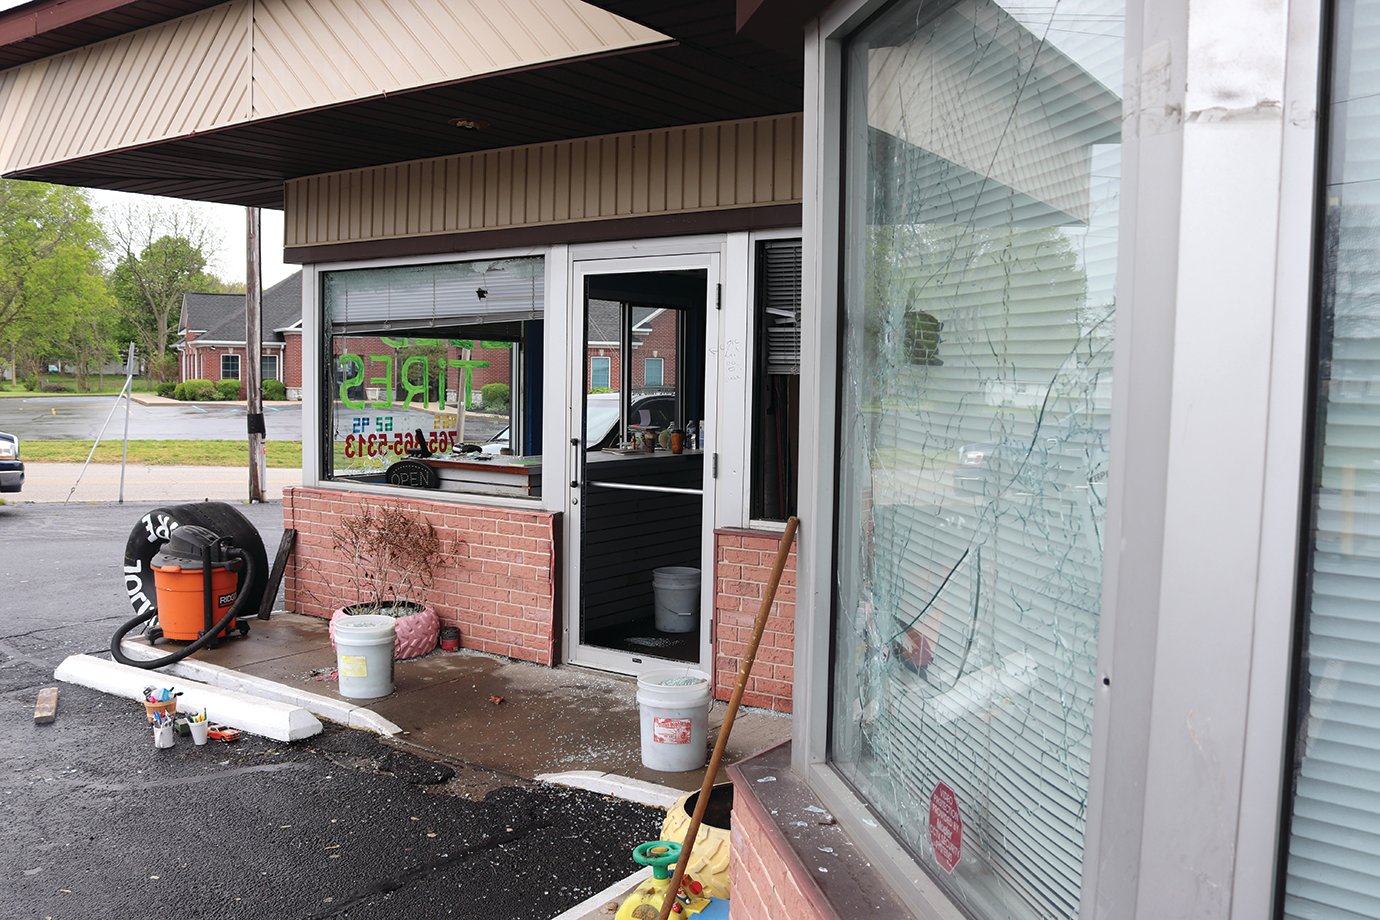 Shattered windows, a slew of bullet holes and signs of widespread damage were still apparent at 10 a.m. Friday as civilians were seen removing debris from the El Frijol Tire building and parking lot at 1000 S. Ladoga Road.